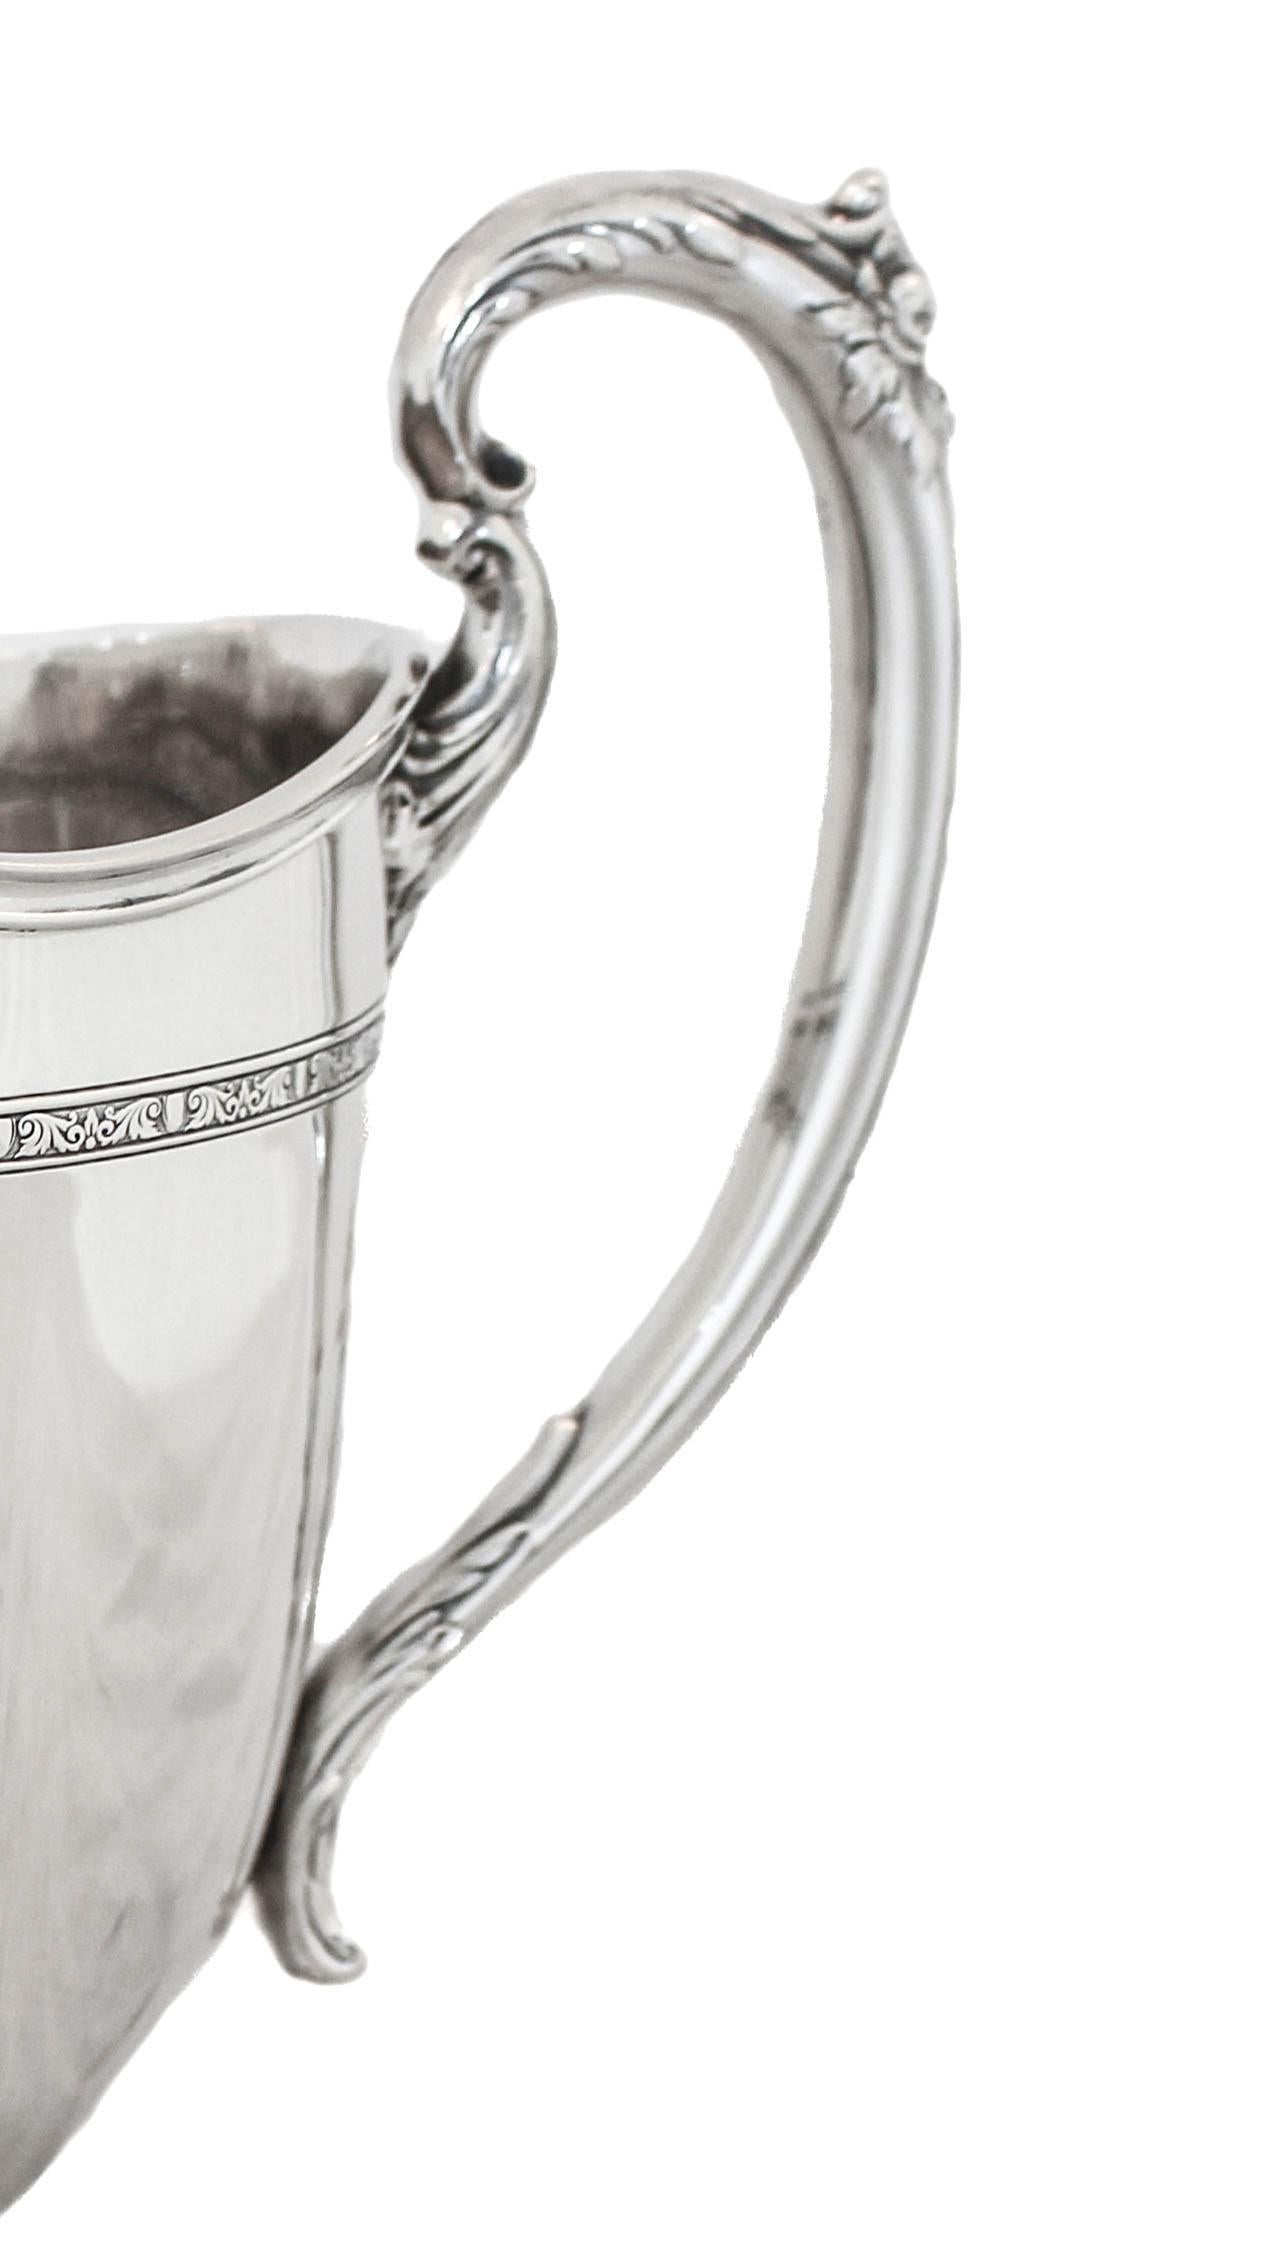 Being offered is a sterling silver water pitcher in the “Lady Constance” pattern by Towle Silversmiths. It has a big rounded-belly and can hold seven pints of water (most water pitchers hold only three to four pints). It has ribbing around the